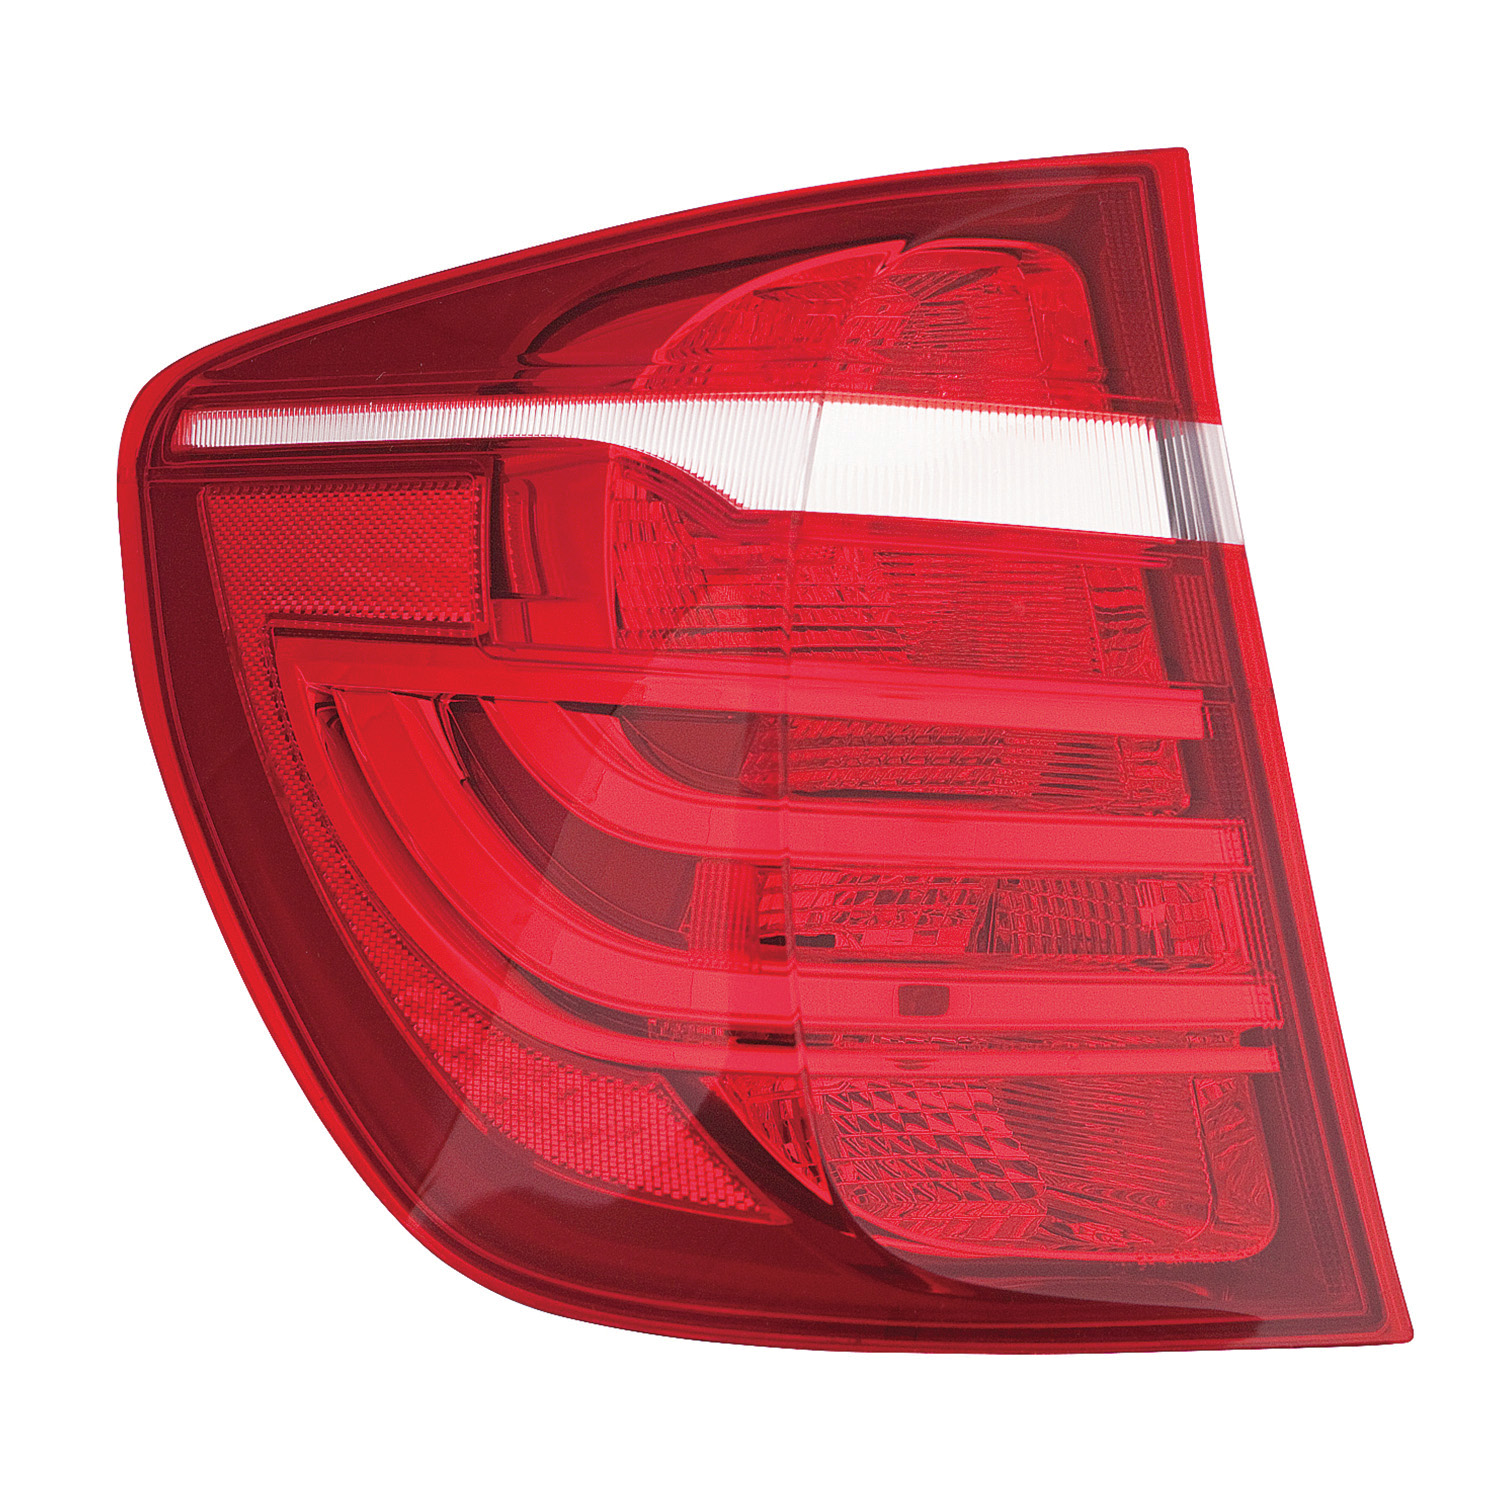 for 2011 - 2017 BMW X3 Tail Light Rear Lamp - Left (Driver) - 2016 2015 2014 | eBay 2012 Bmw X3 Brake Light Bulb Replacement